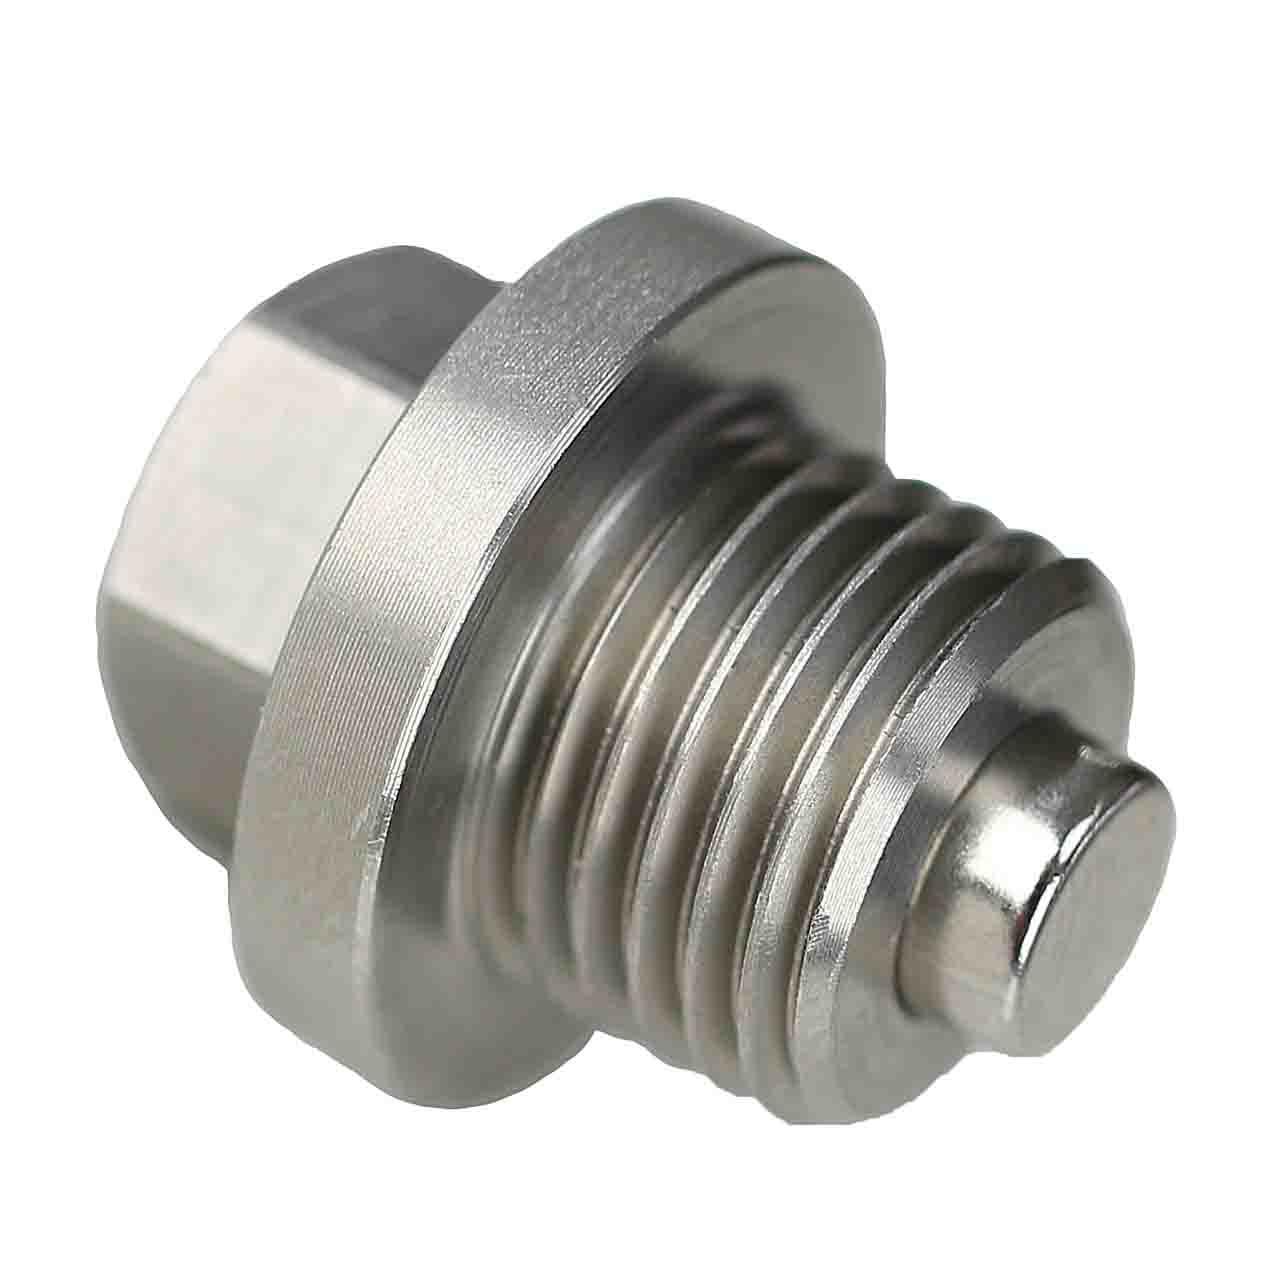 Arctic Cat Stainless Steel CHAINCASE/GEARCASE Oil Drain Plug with Neodymium Magnet  - Part Number 0623-293 / 0602-479